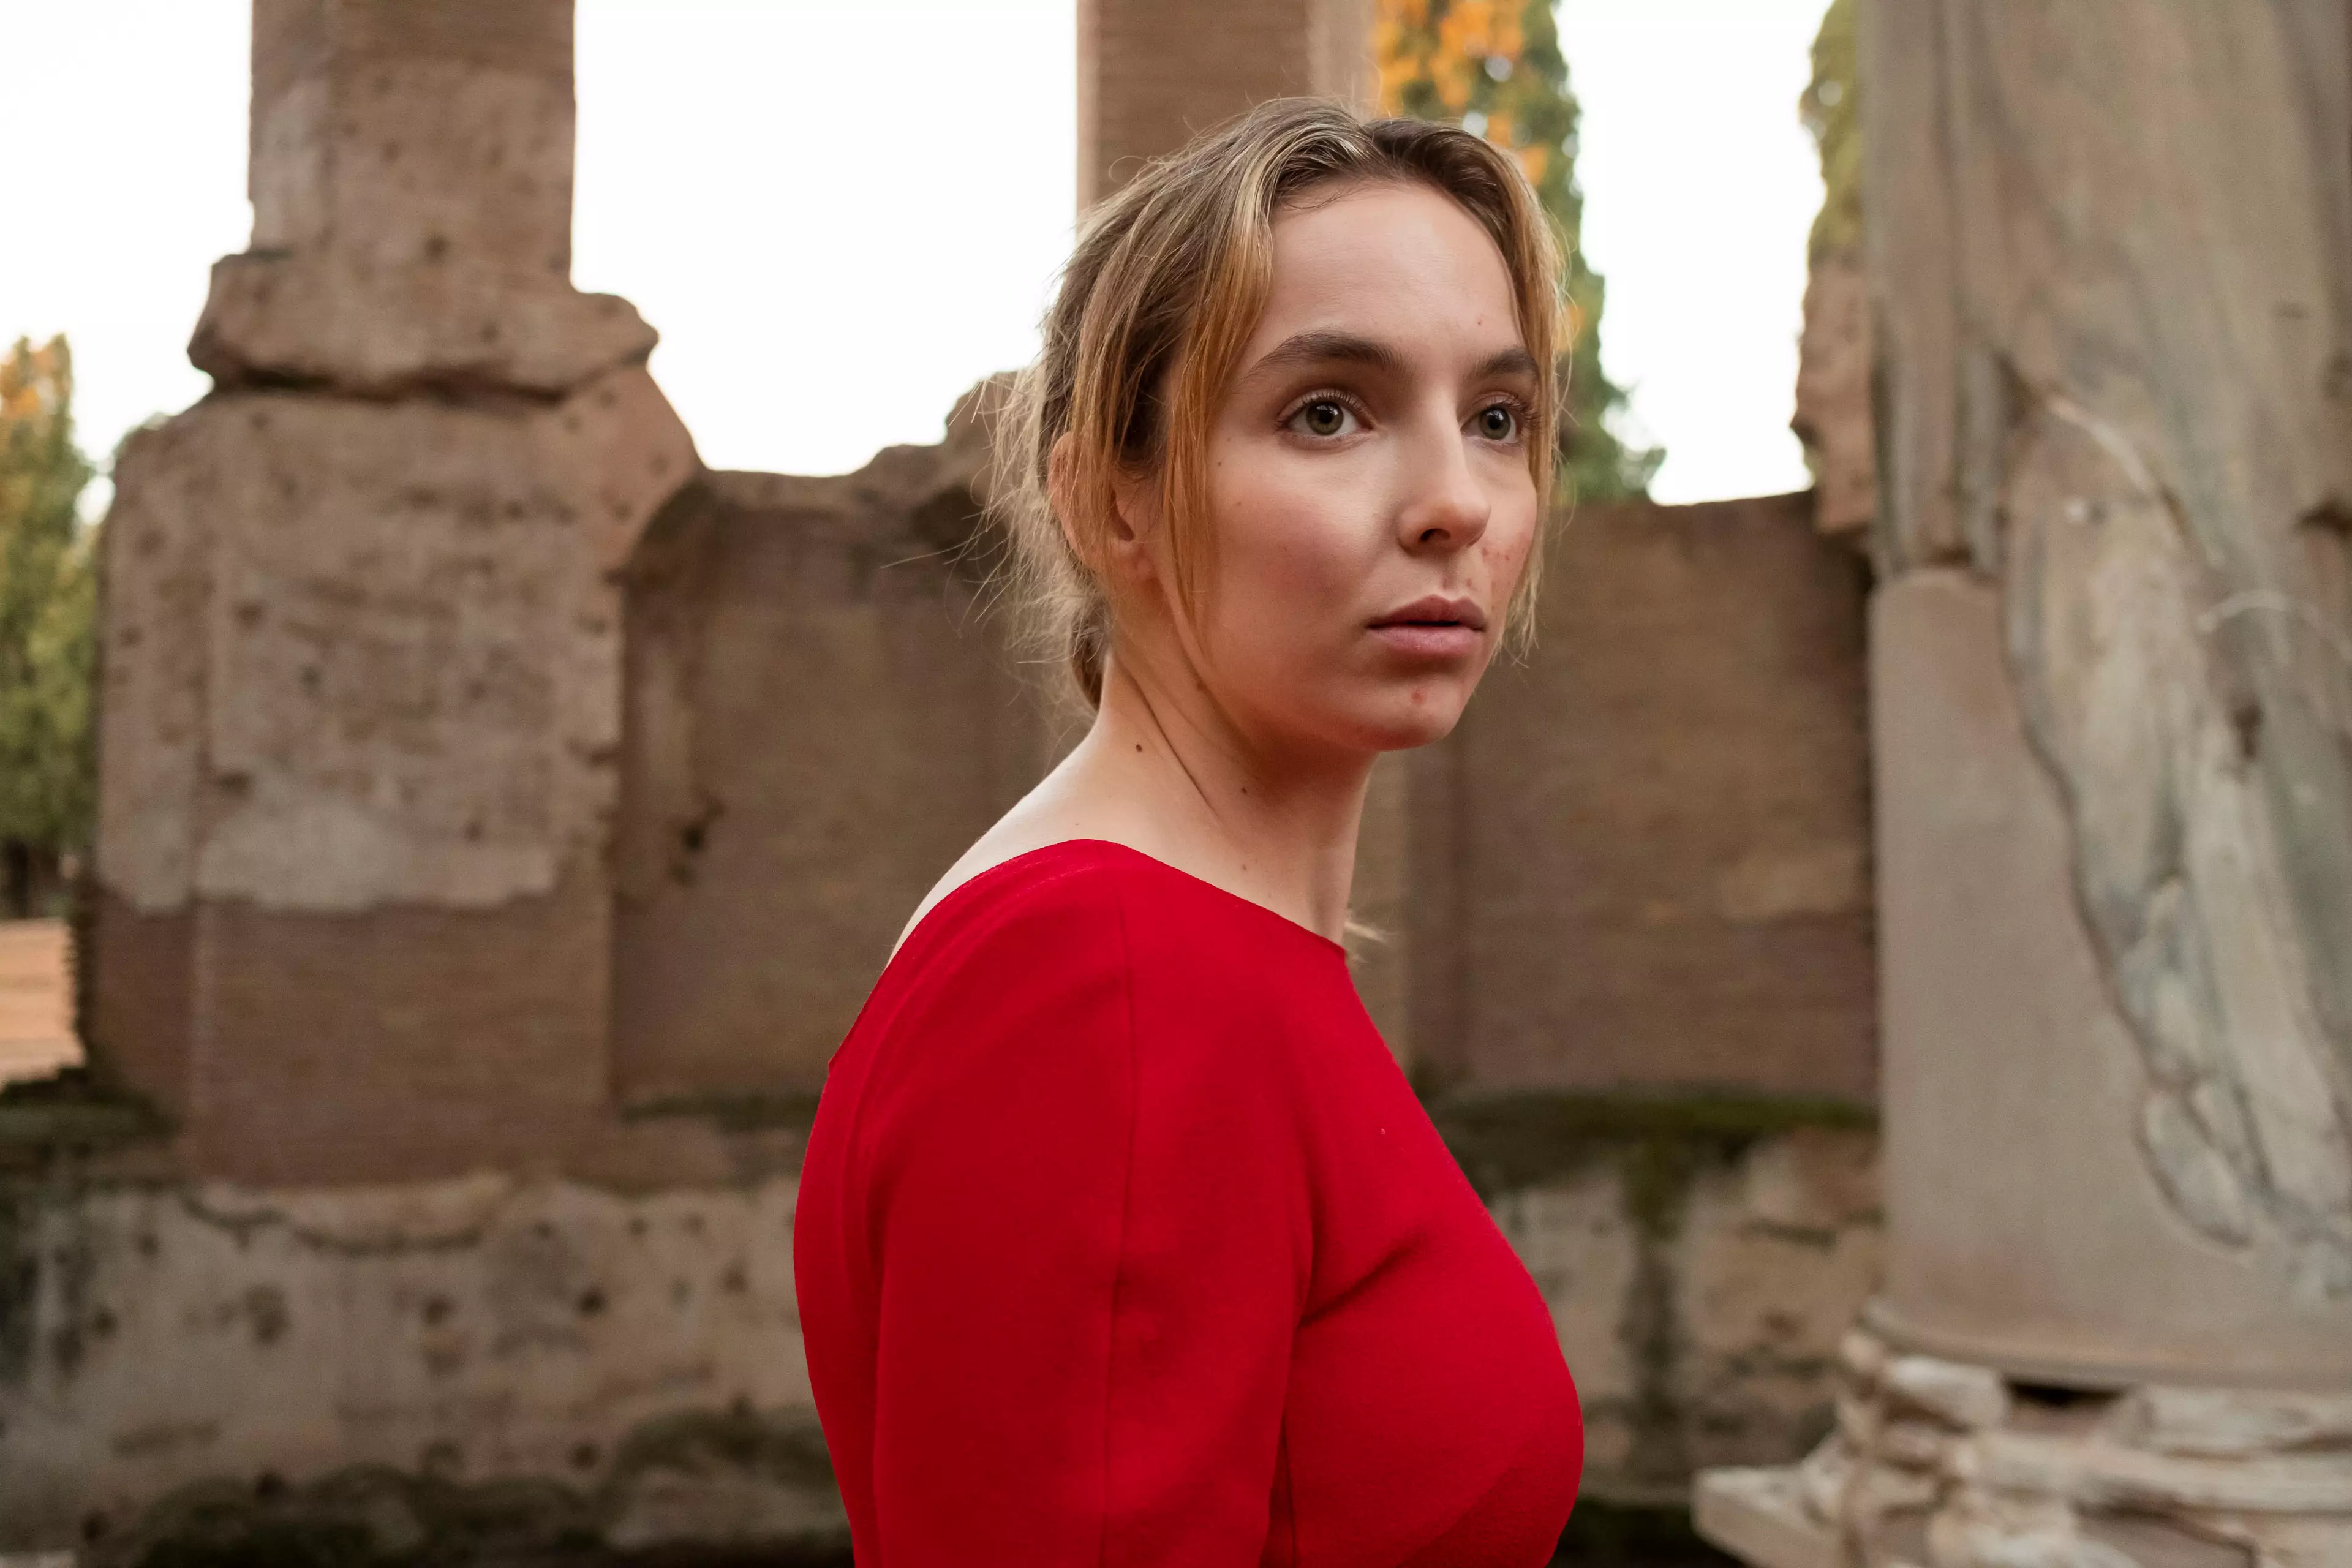 'Killing Eve' will also be back for a fourth season (